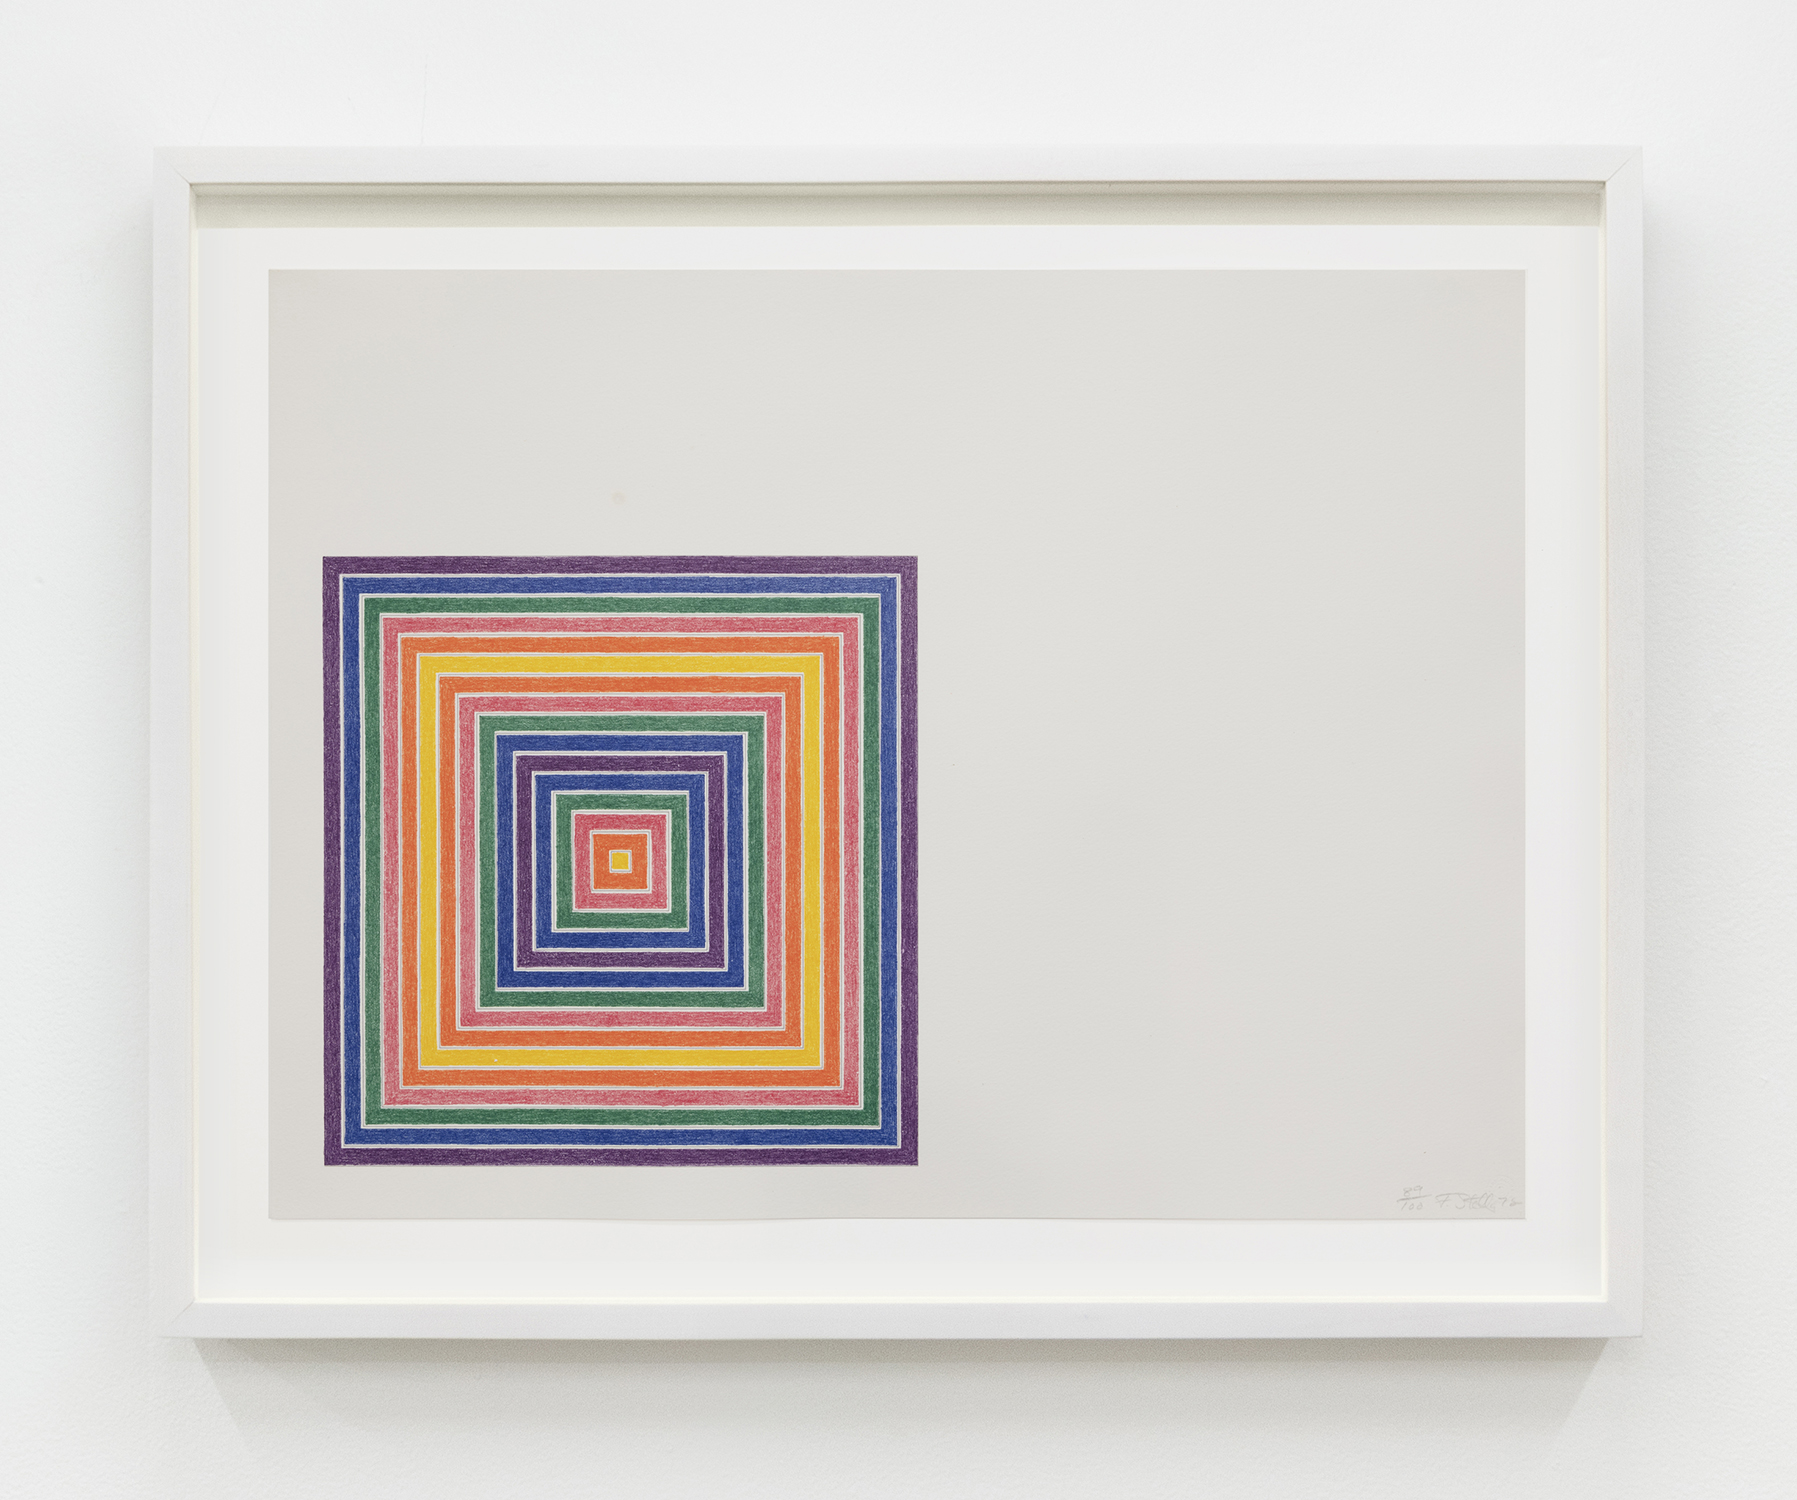 Frank Stella Honduras Lottery Co., from Multicolored Squares, 1972 Lithograph Image Dimensions: 16 x 21 3/4 inches (40.6 x 55.2 cm) Paper Dimensions: 40 1/2 x 55 1/8 inches (102.9 x 140 cm) Edition of 100